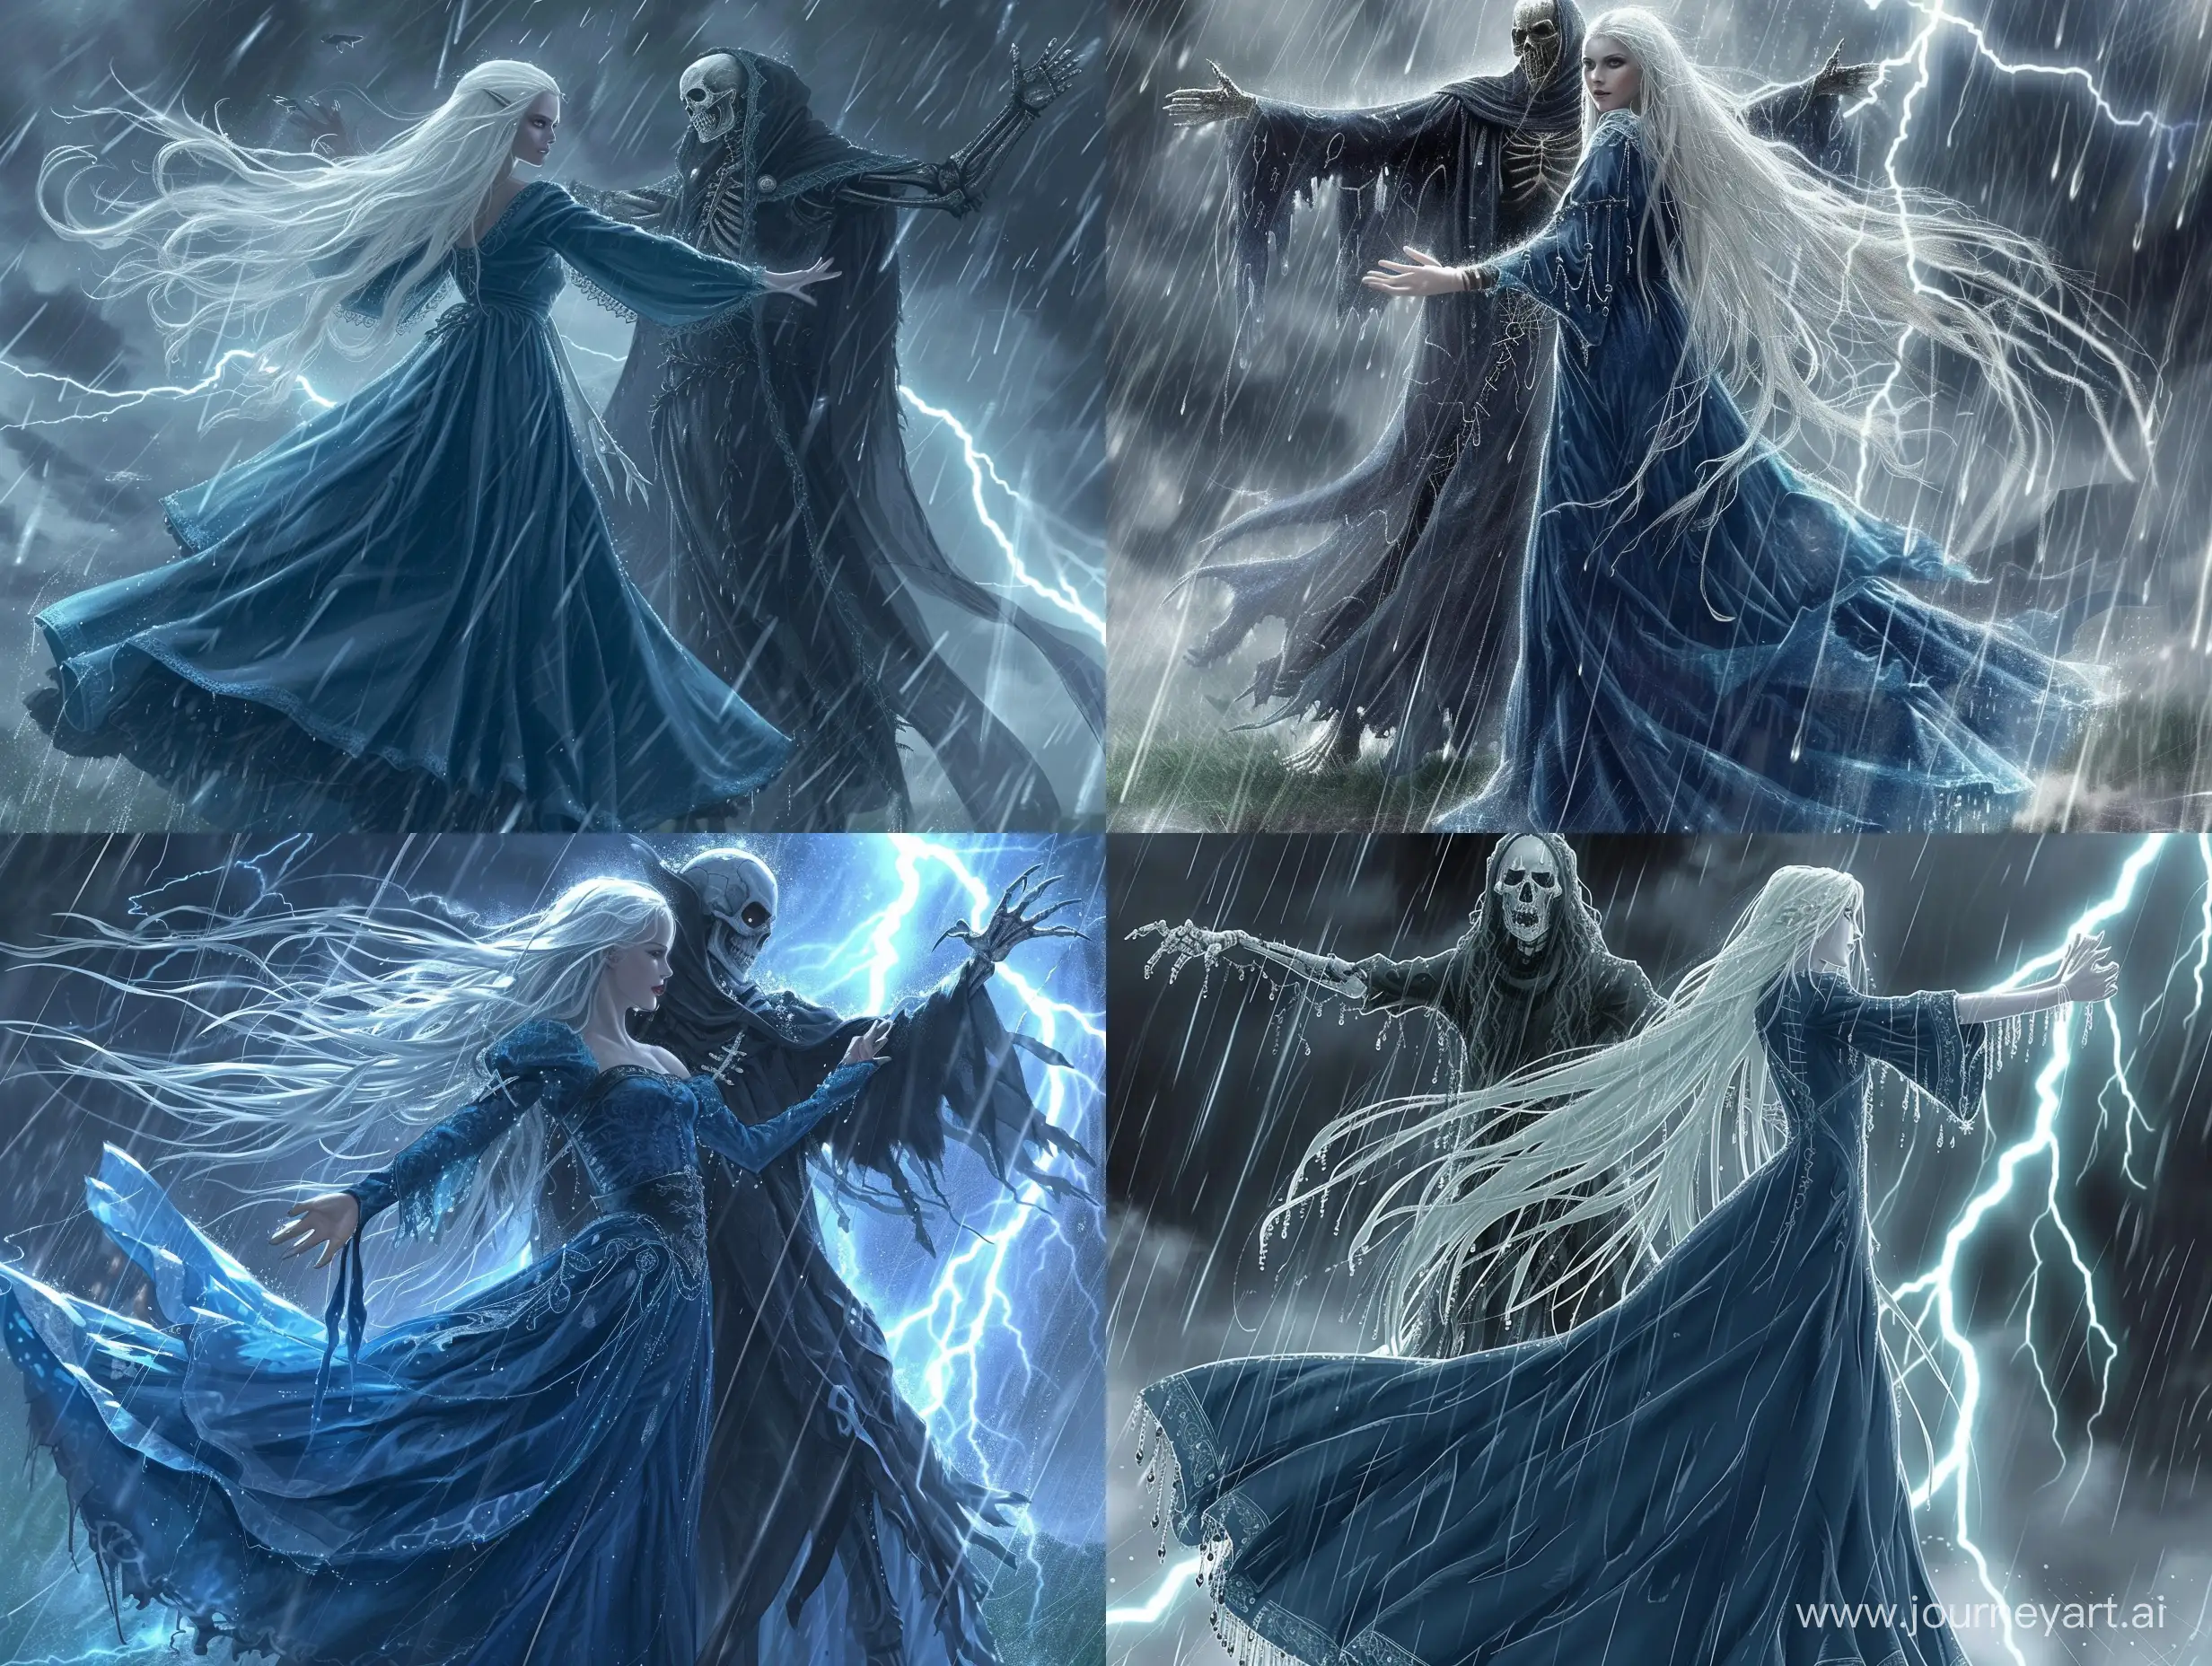 a beautiful girl, long white hair, dressed in a long medieval blue dress, death stands behind her with his arms outstretched, it's raining, lightning is flashing